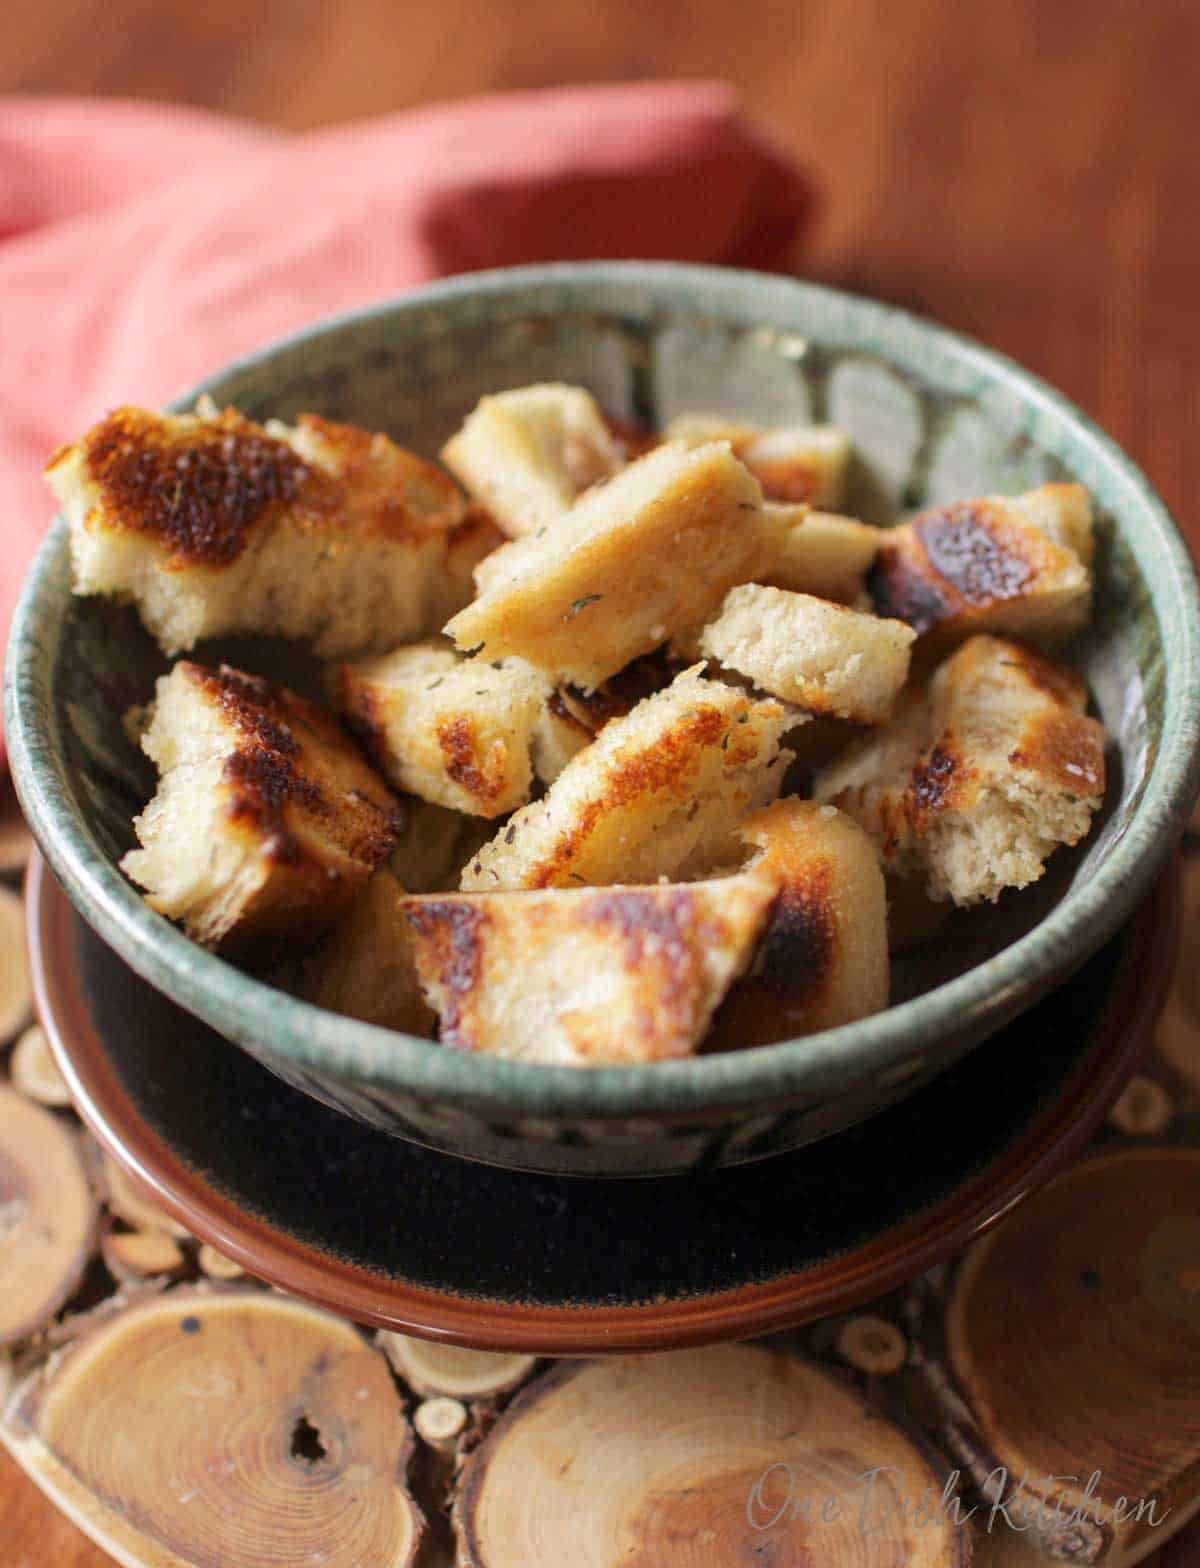 A closeup of a bowl of homemade croutons on a wooden trivet